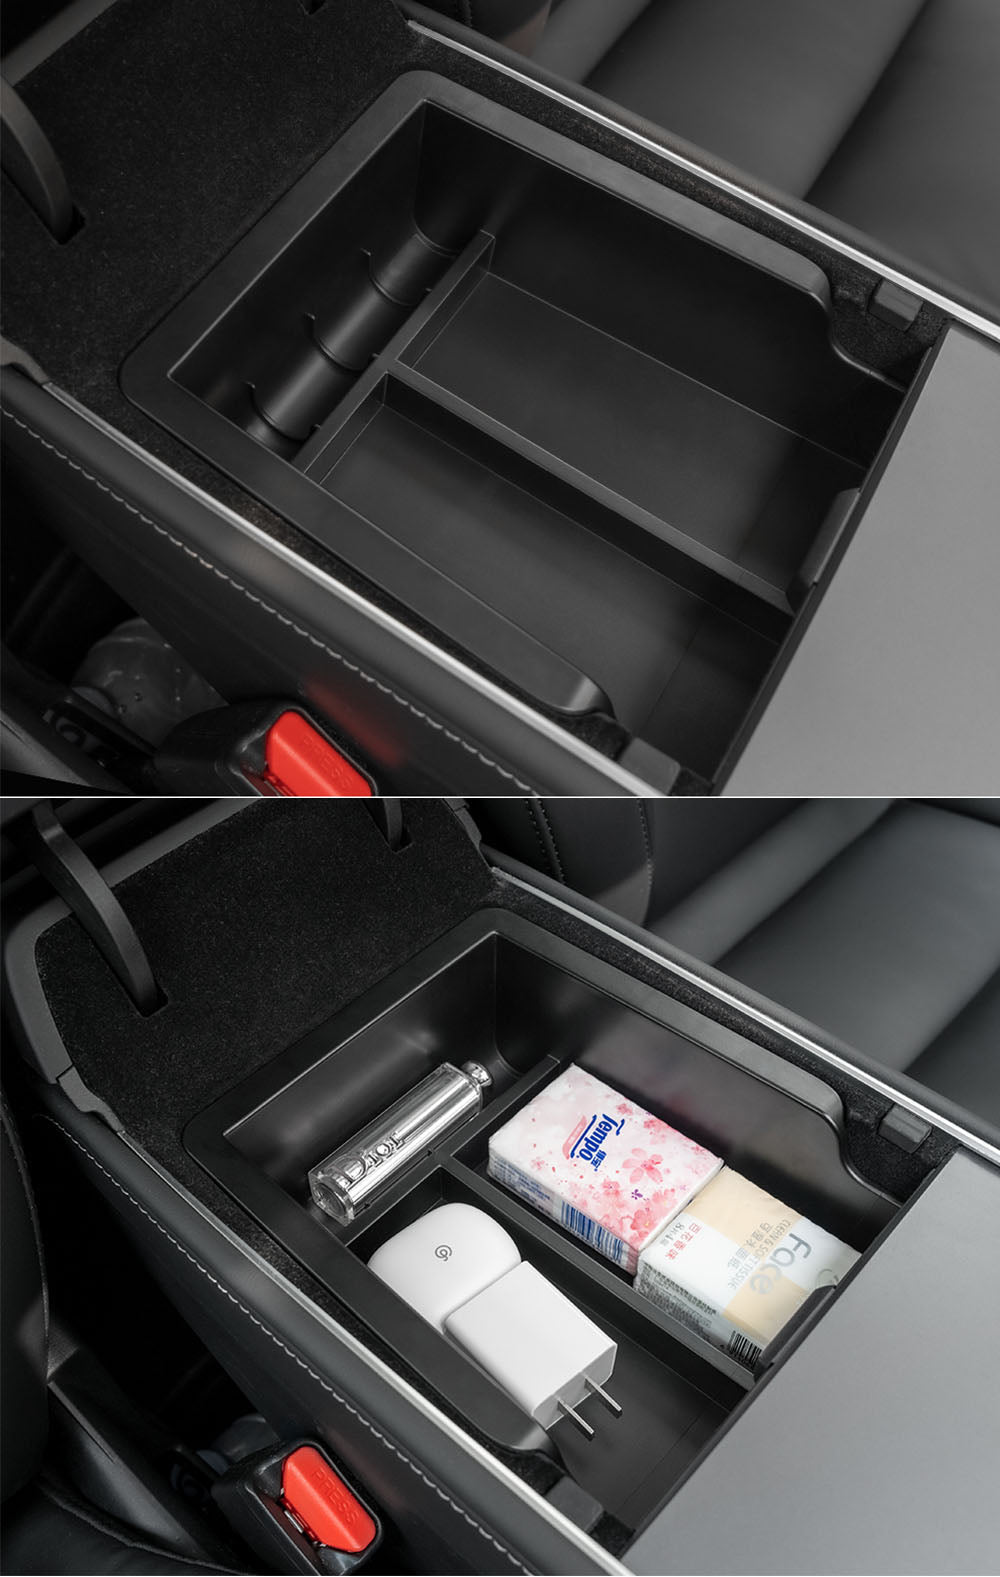 Flocking Central Storage Box Organizer and Rear Central Storage Box Organizer and Water Cup Holder Cover with Storage 3in1 Set For Model 3 and Model Y